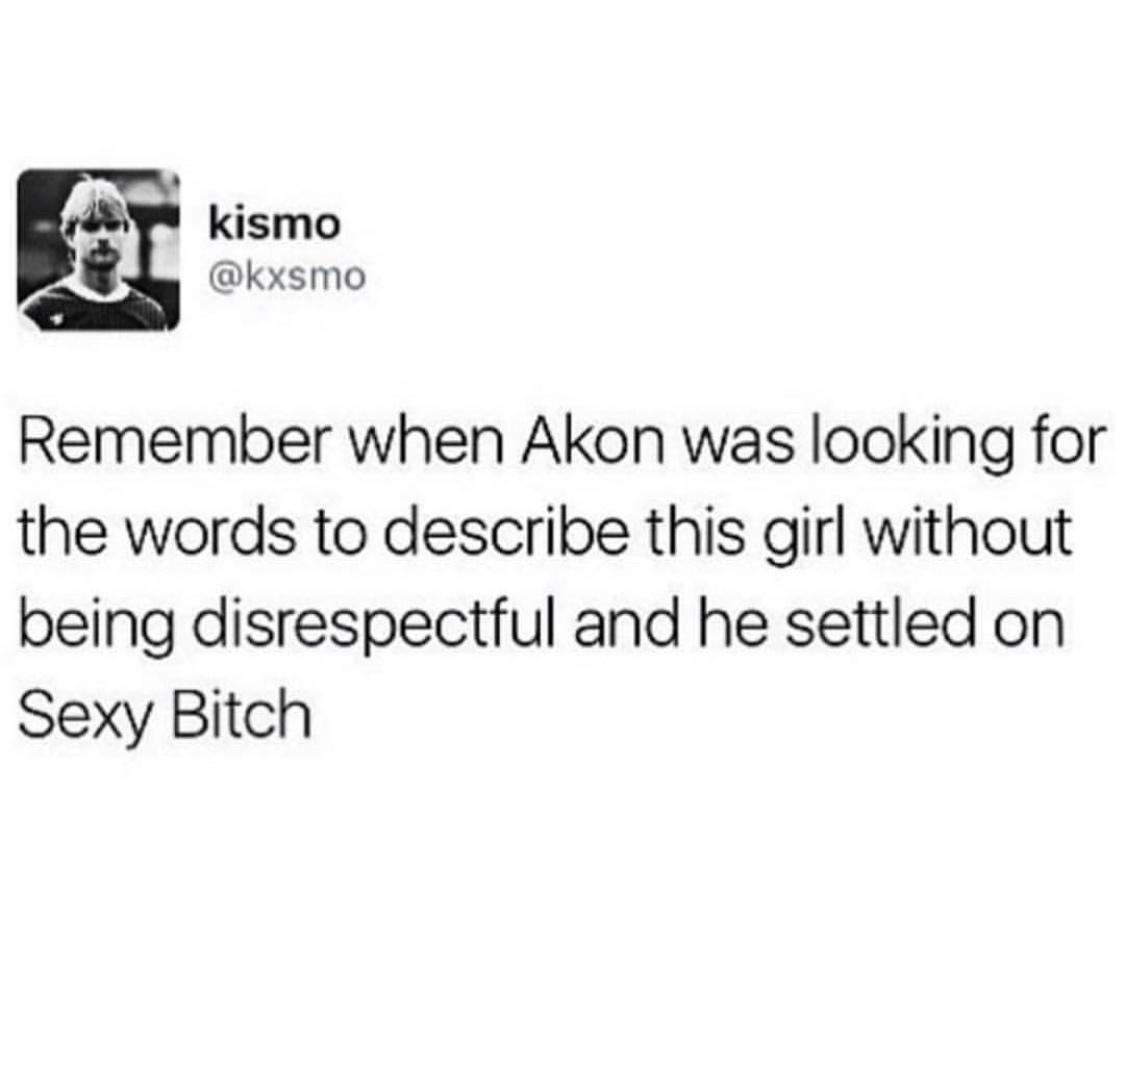 dank meme of remember when akon - kismo Remember when Akon was looking for the words to describe this girl without being disrespectful and he settled on Sexy Bitch